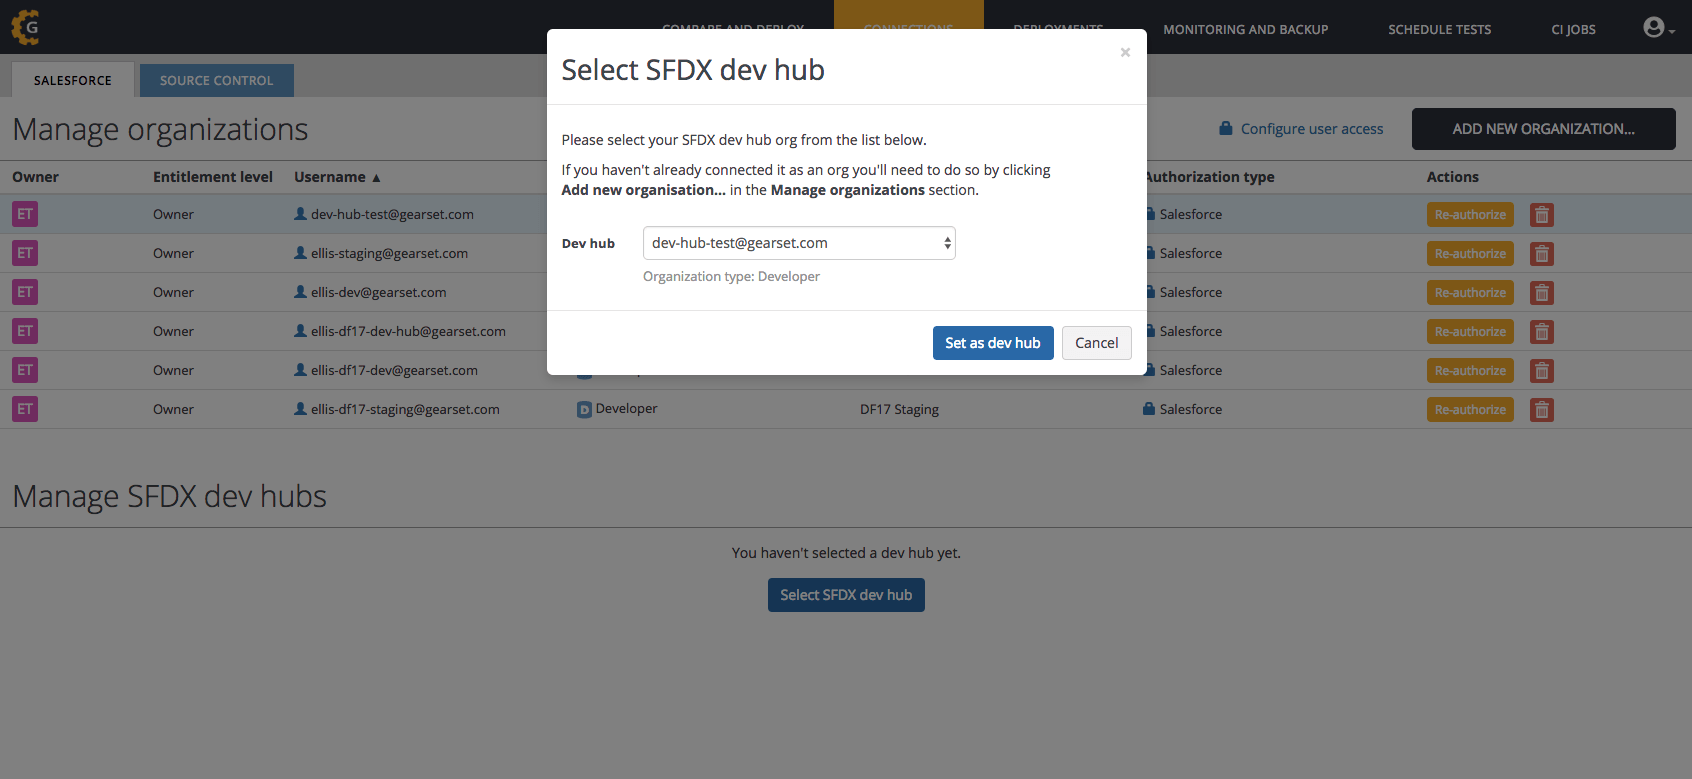 Select your Dev Hub from the dropdown